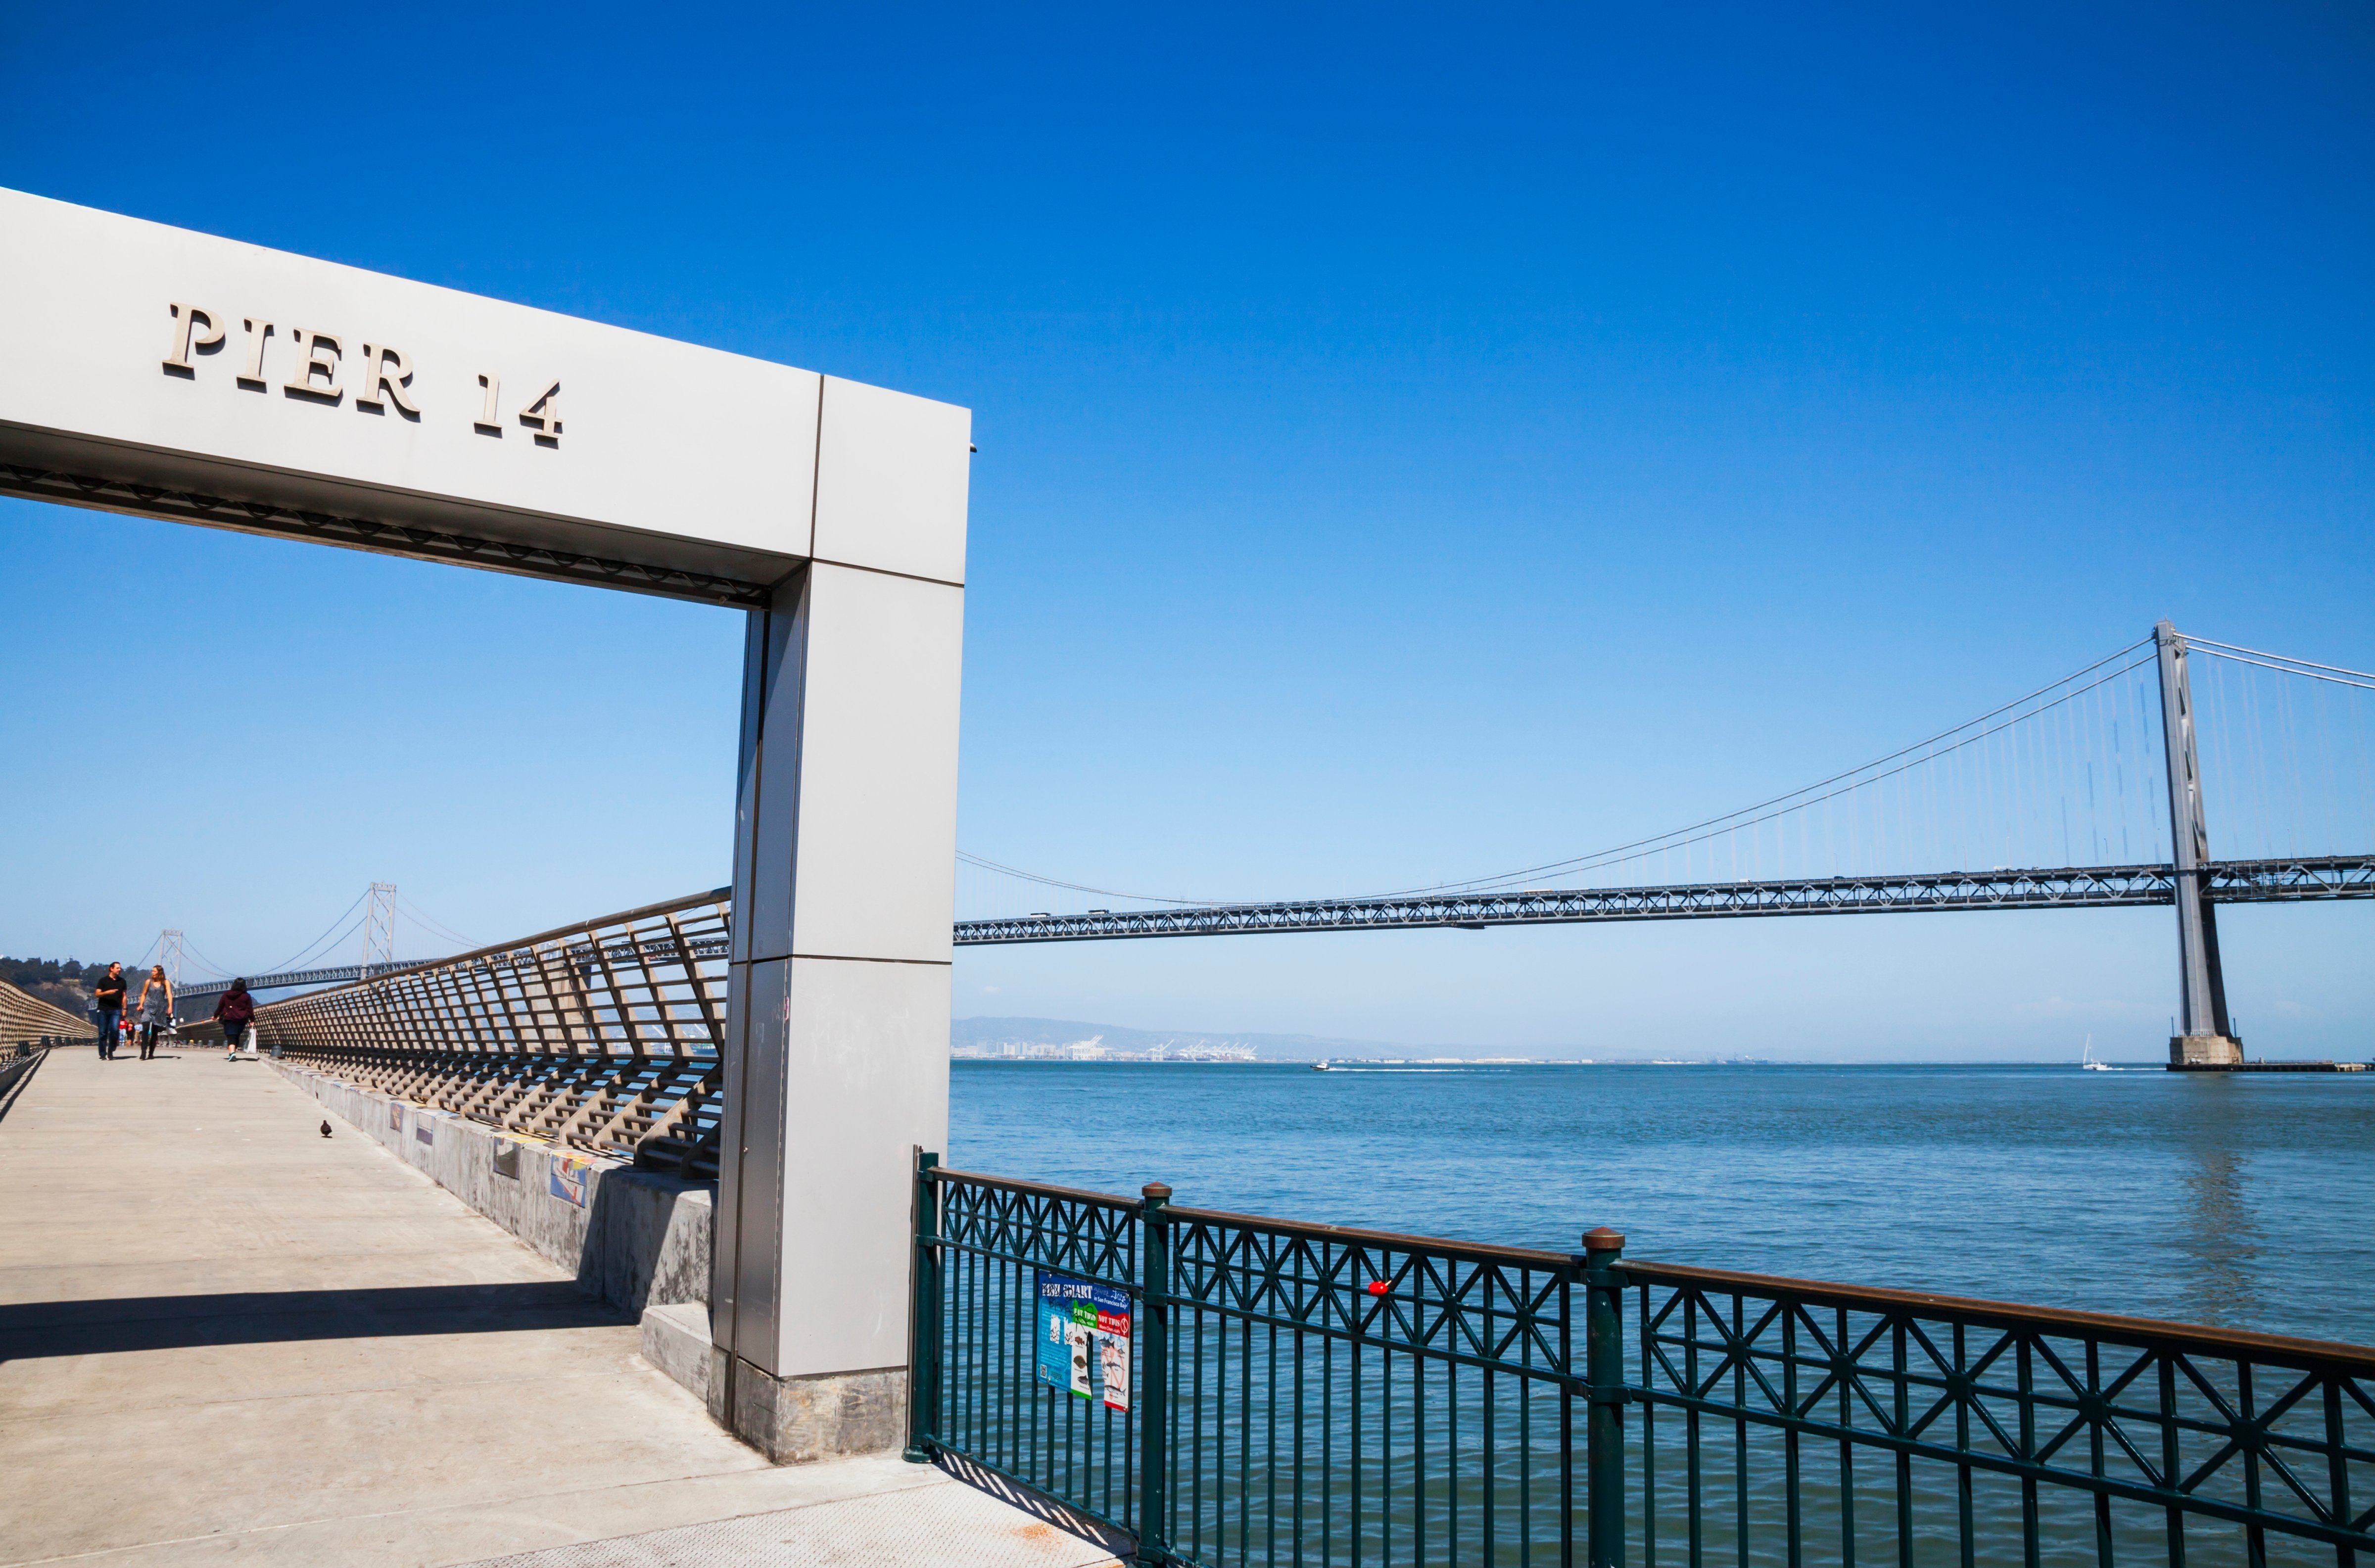 A view of the Oakland Bay Bridge from Pier 14 (Leah Bignell&mdash;Getty Images/Perspectives)